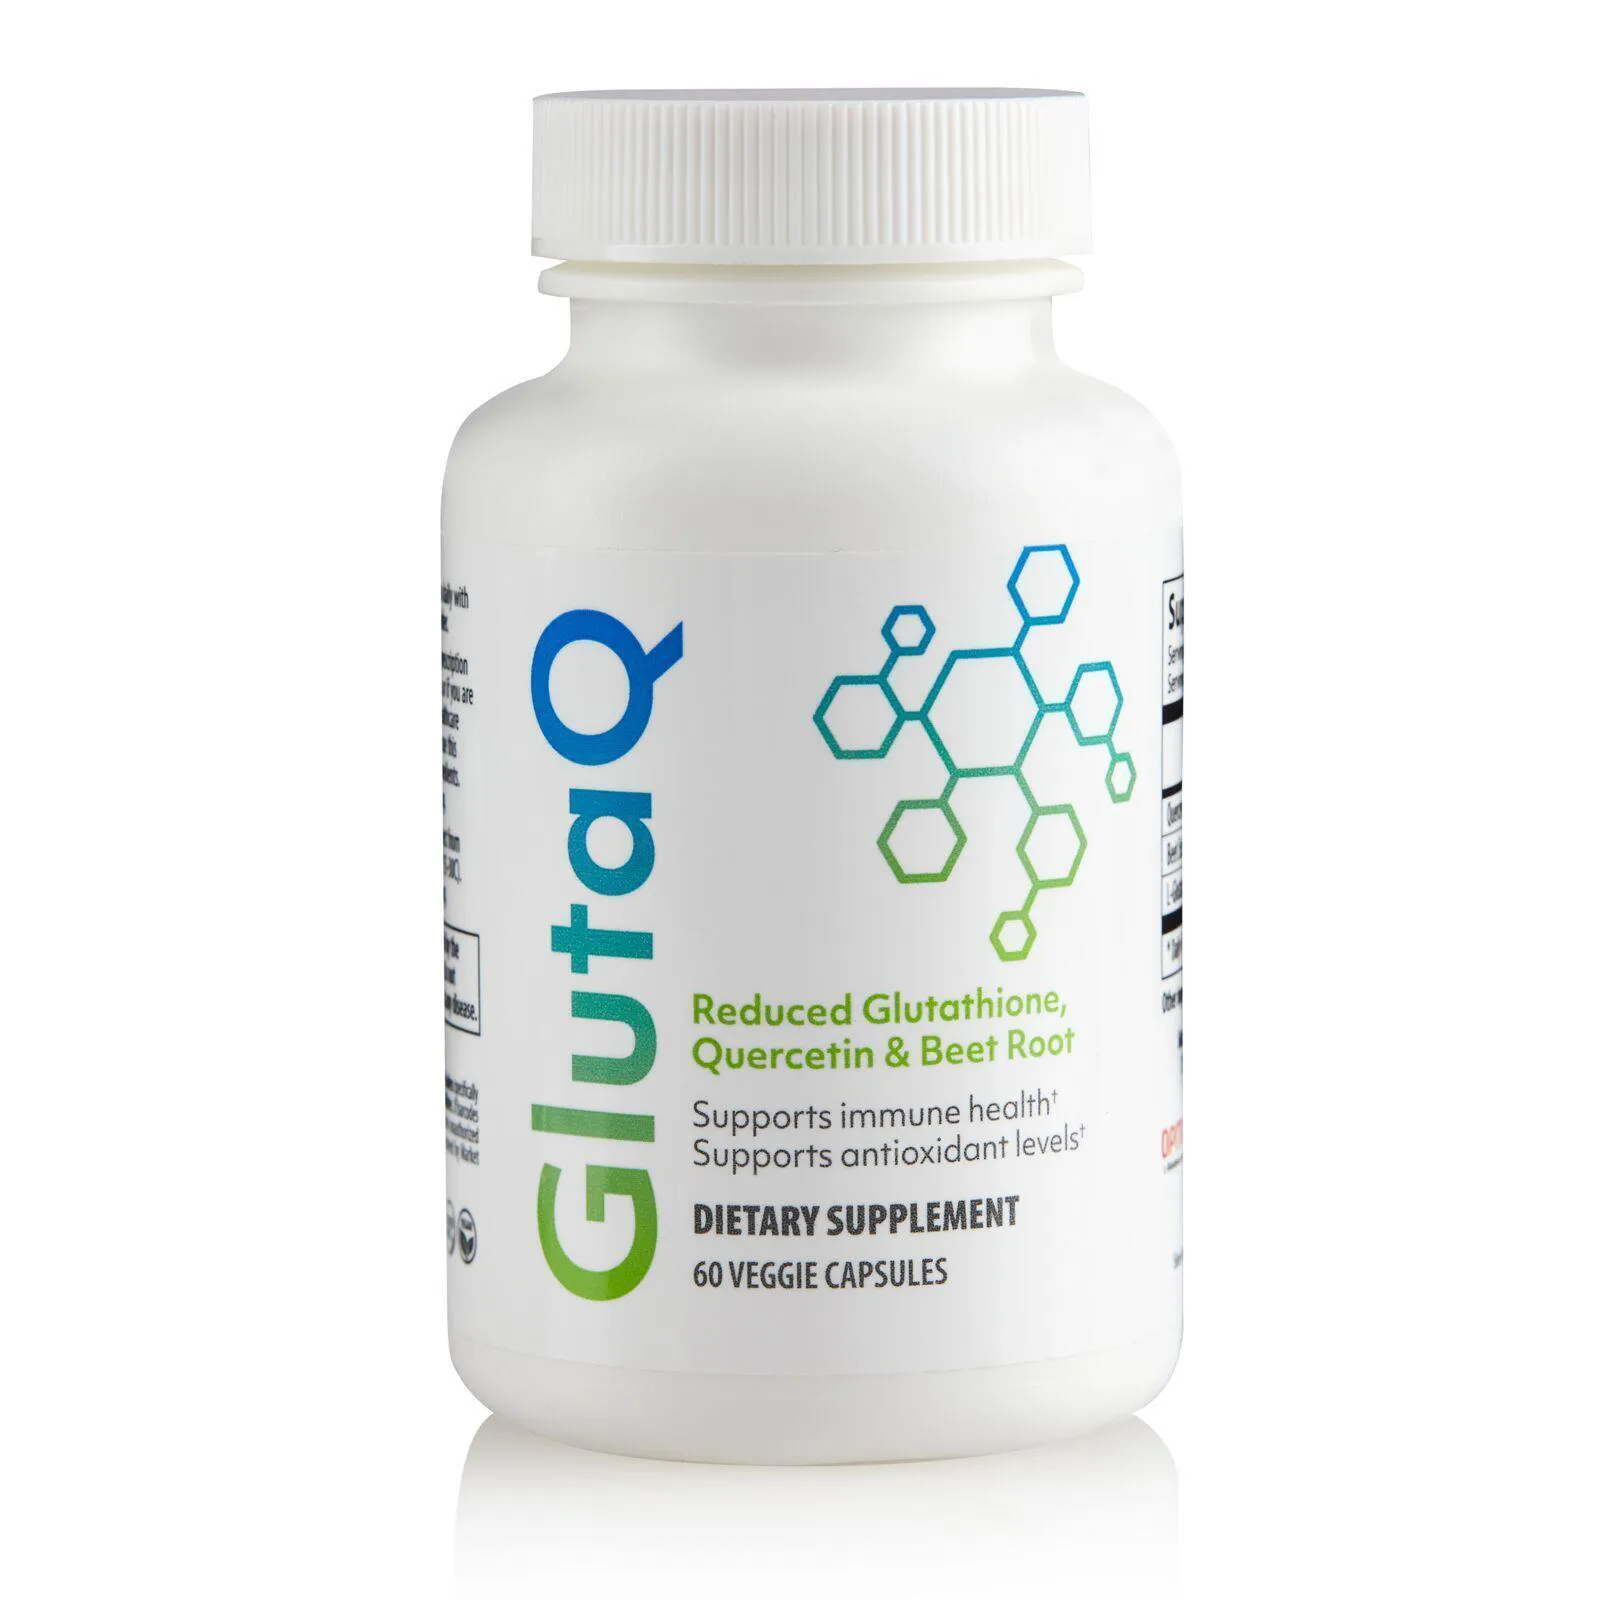 GlutaQ - Reduced Glutathione, Quercetin and Beet Root